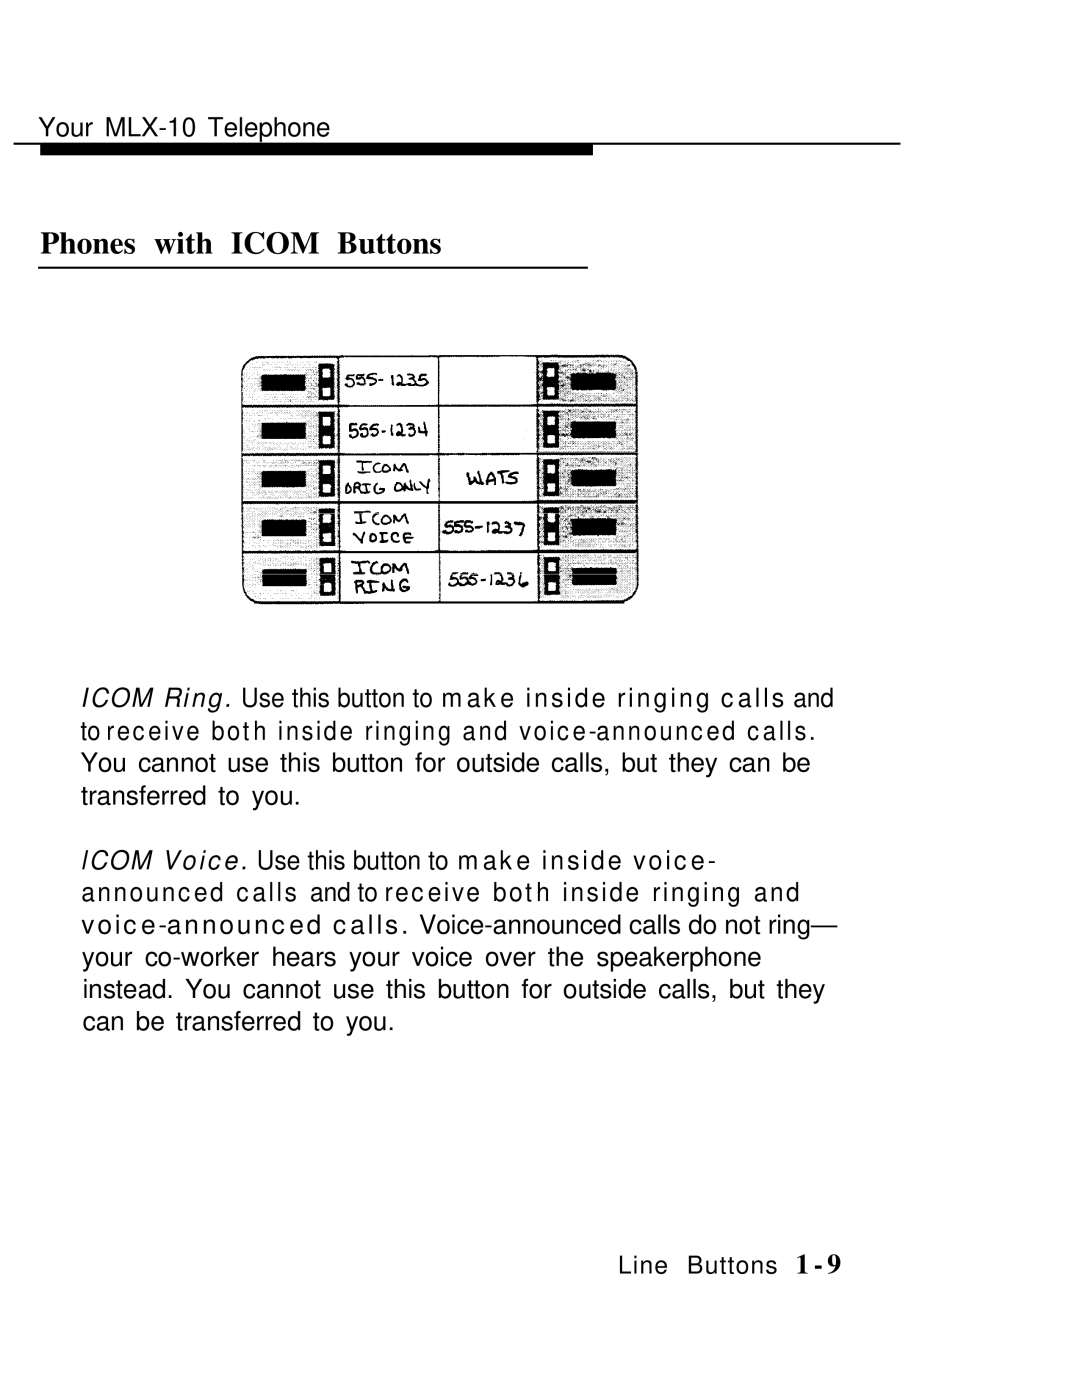 AT&T MLX-10 manual Phones with Icom Buttons, Icom Ring. Use this button to make inside ringing calls 